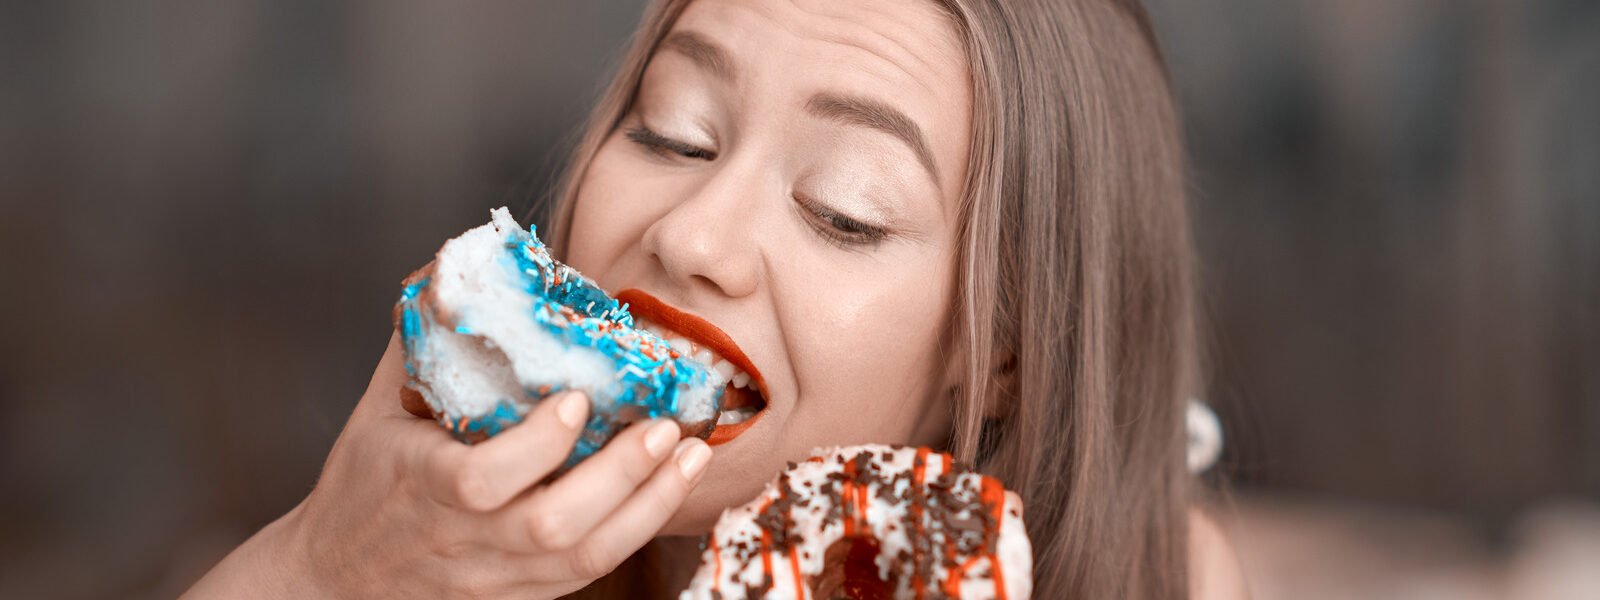 How Giving Into Your Craving Could Help Heal Your Relationship With Food - Health Digest